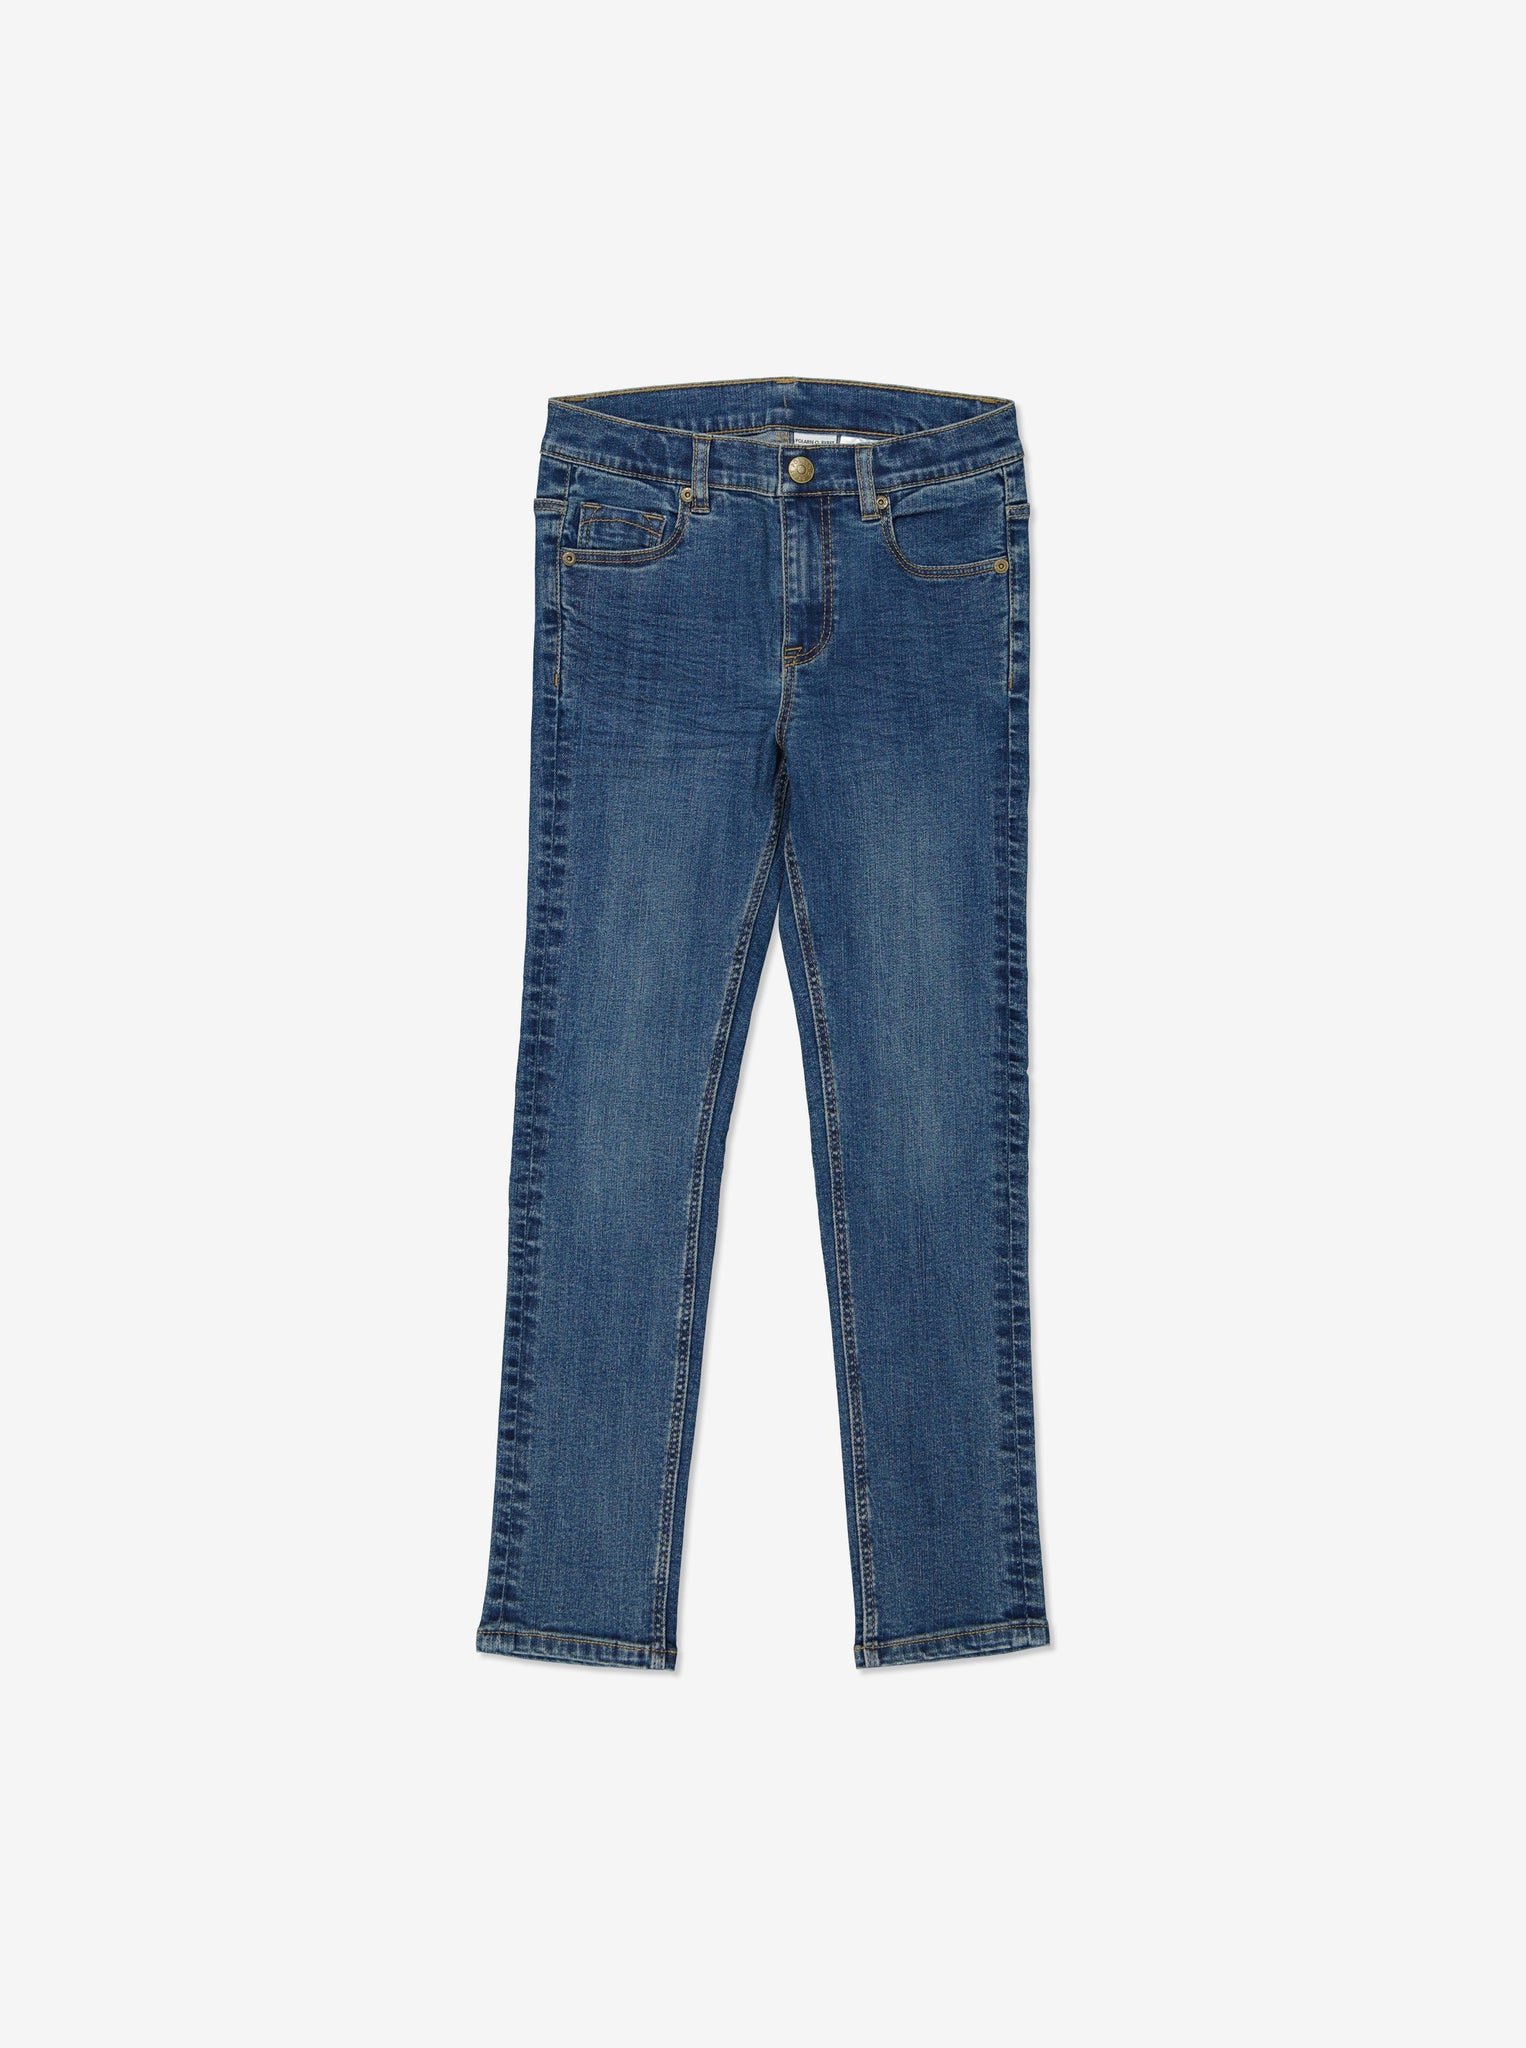  Organic Kids Slim Fit Blue Denim Jeans from Polarn O. Pyret Kidswear. Made from sustainable materials.